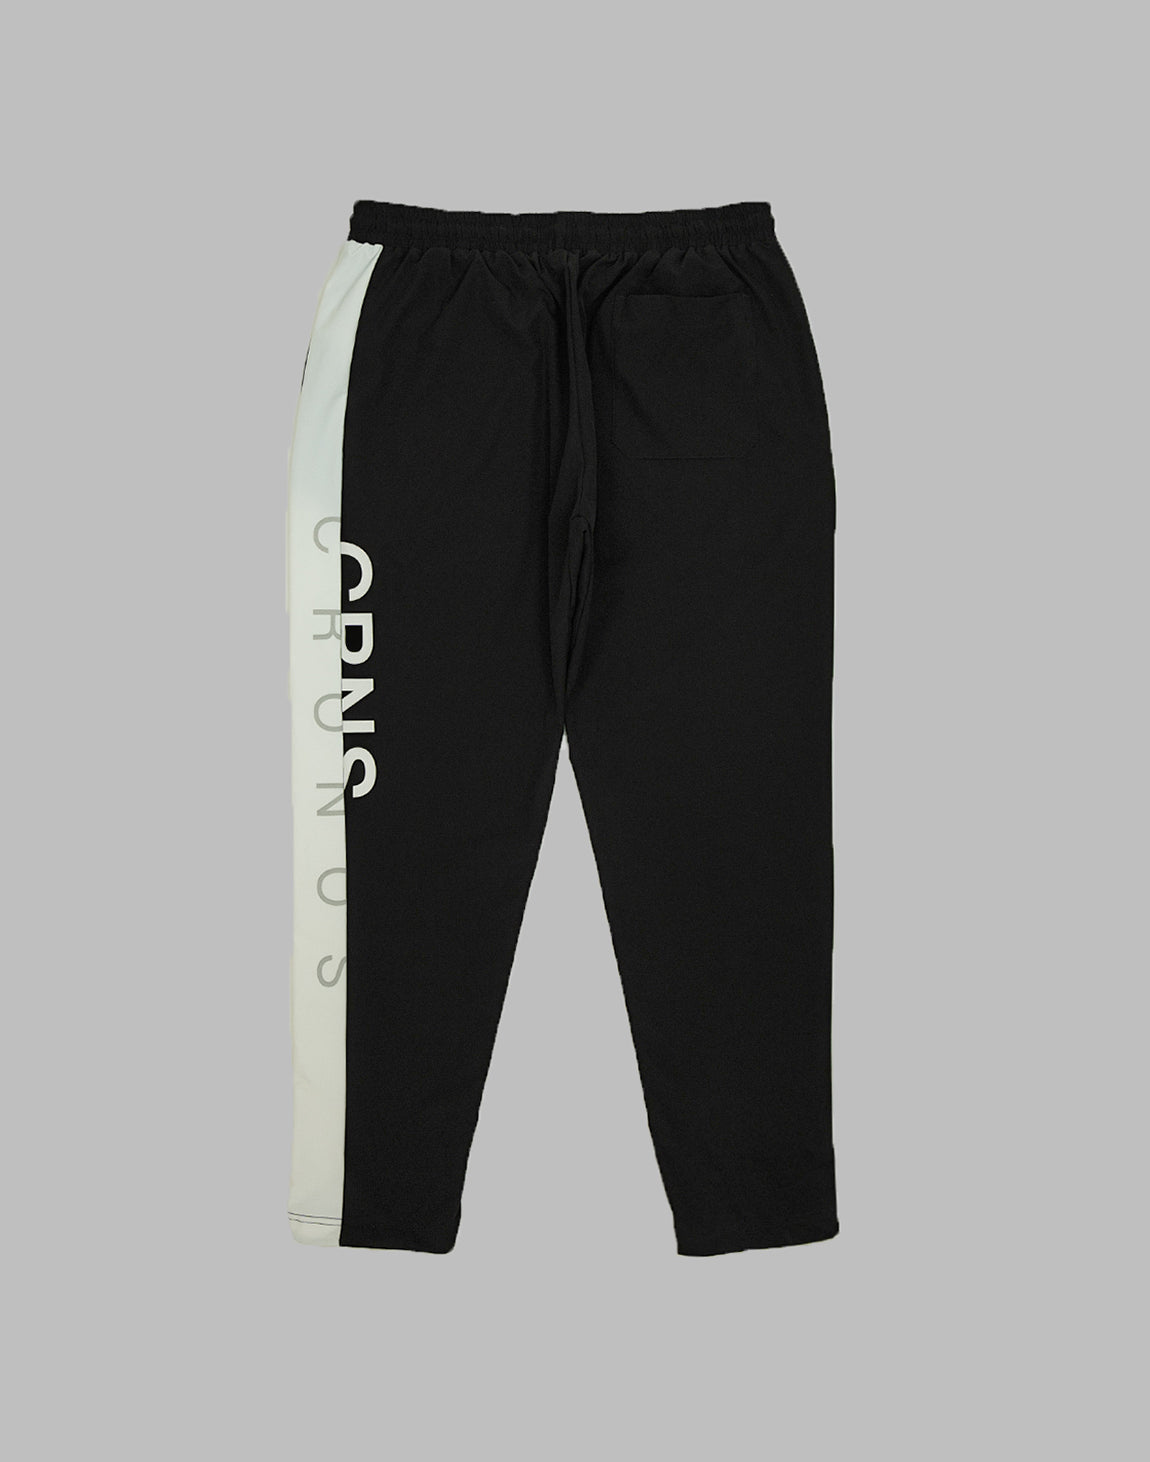 CRONOS CRNS COOL TOUCH LONGPANTS – クロノス CRONOS Official Store